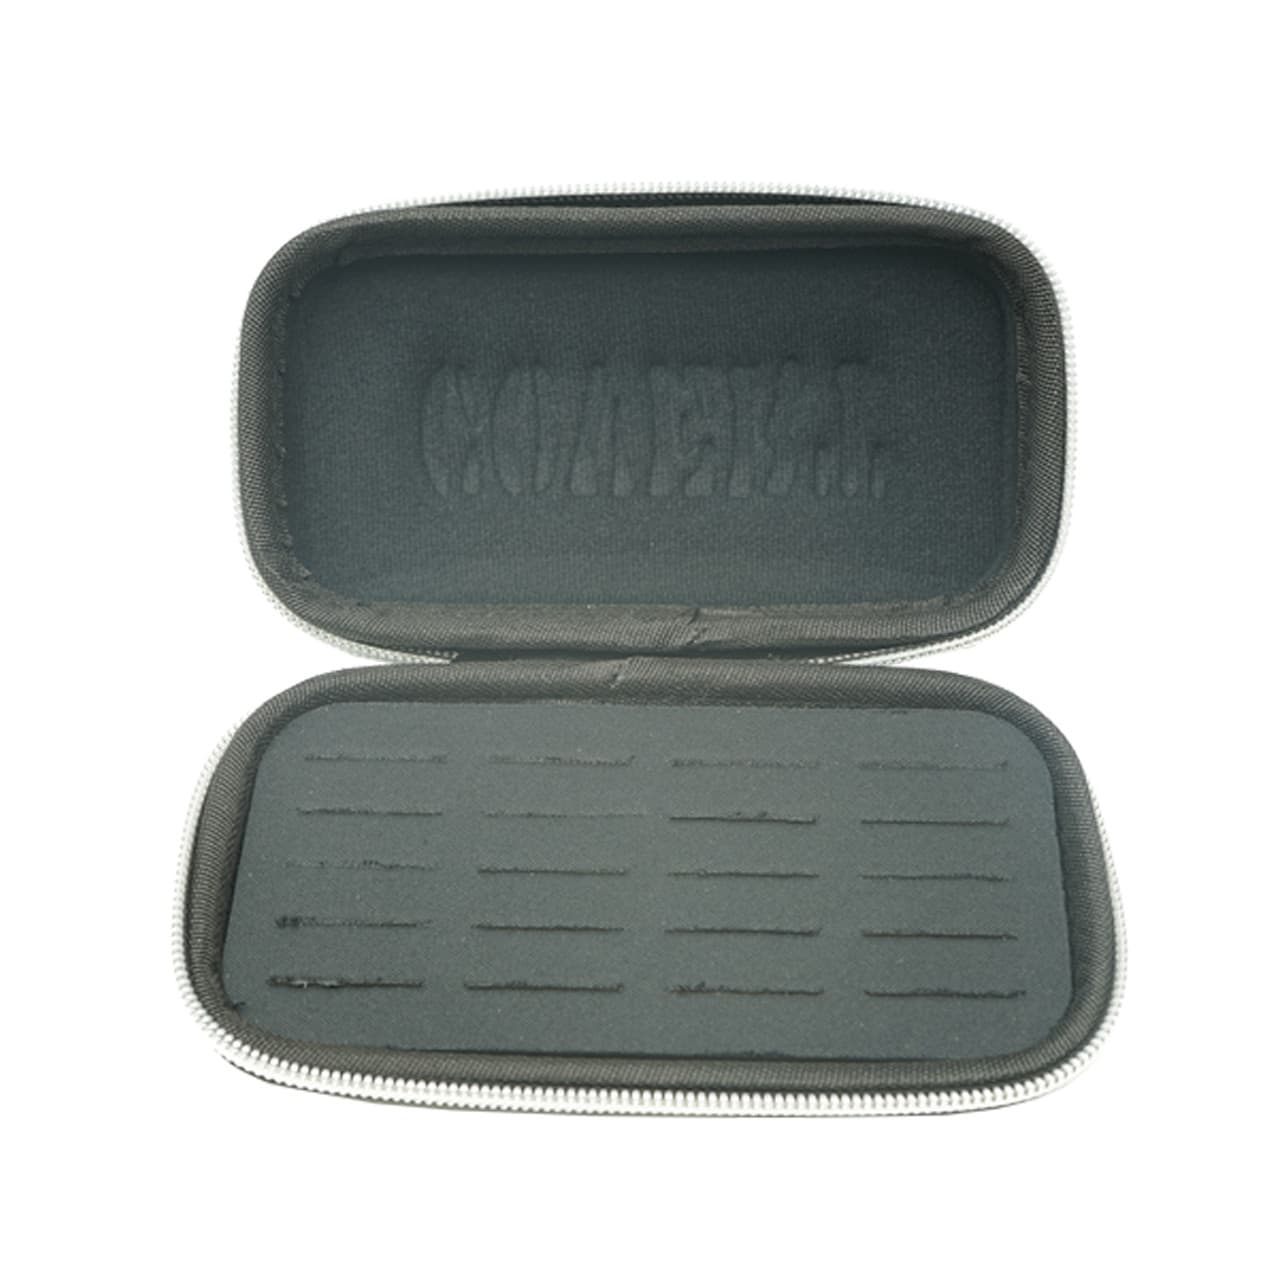 SD card carrying case open